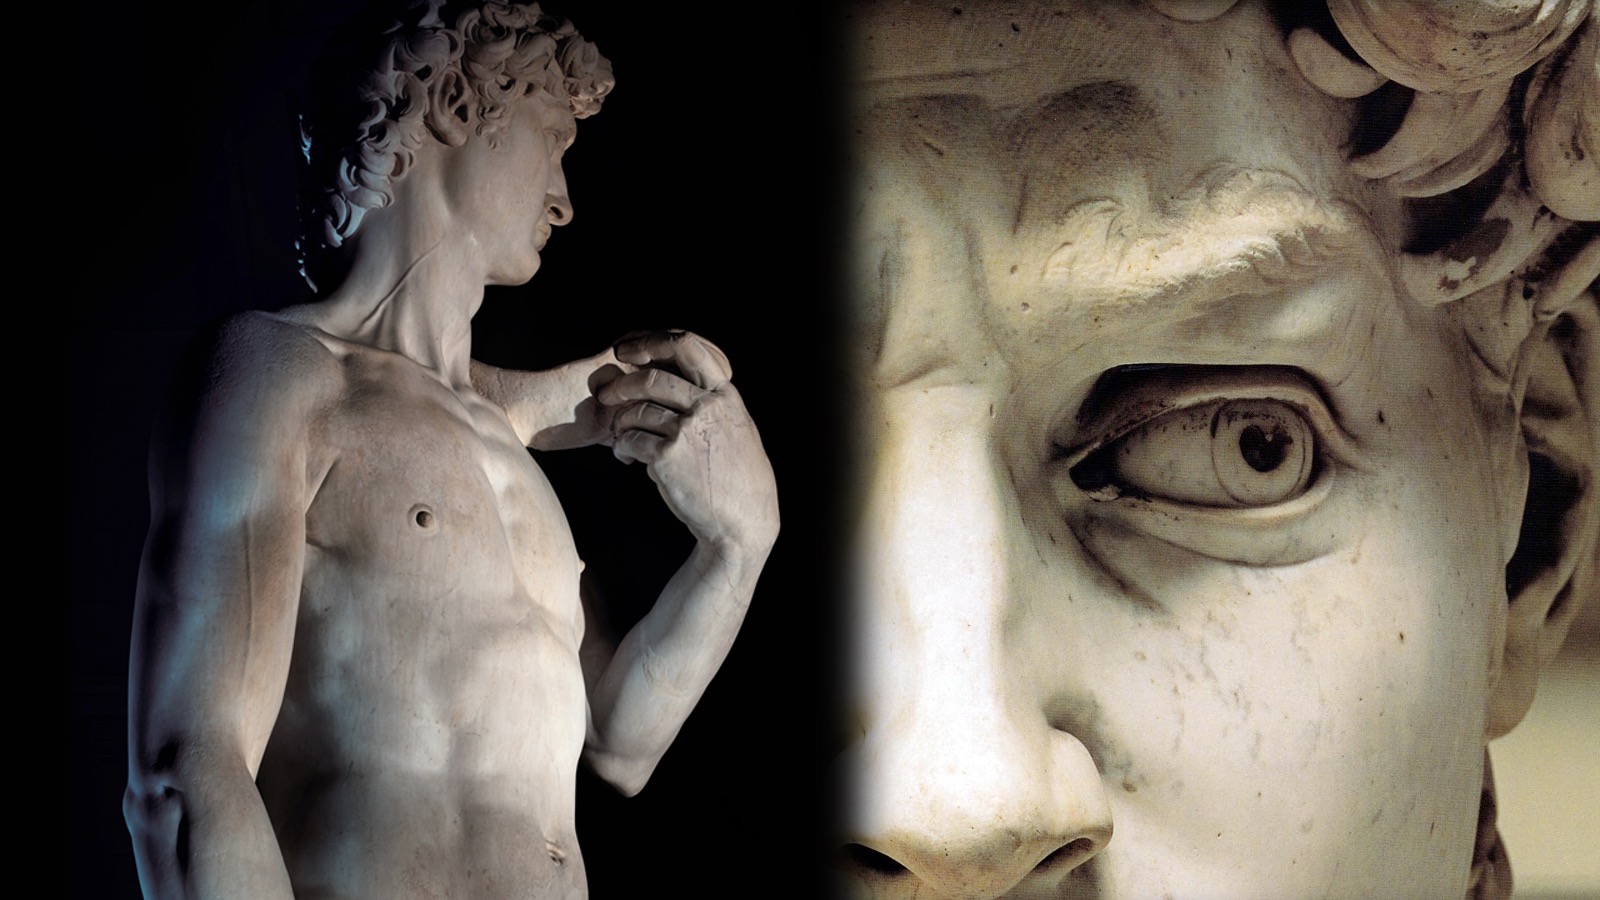 Discover Galleria dell'Accademia in a fascinating guided tour by night